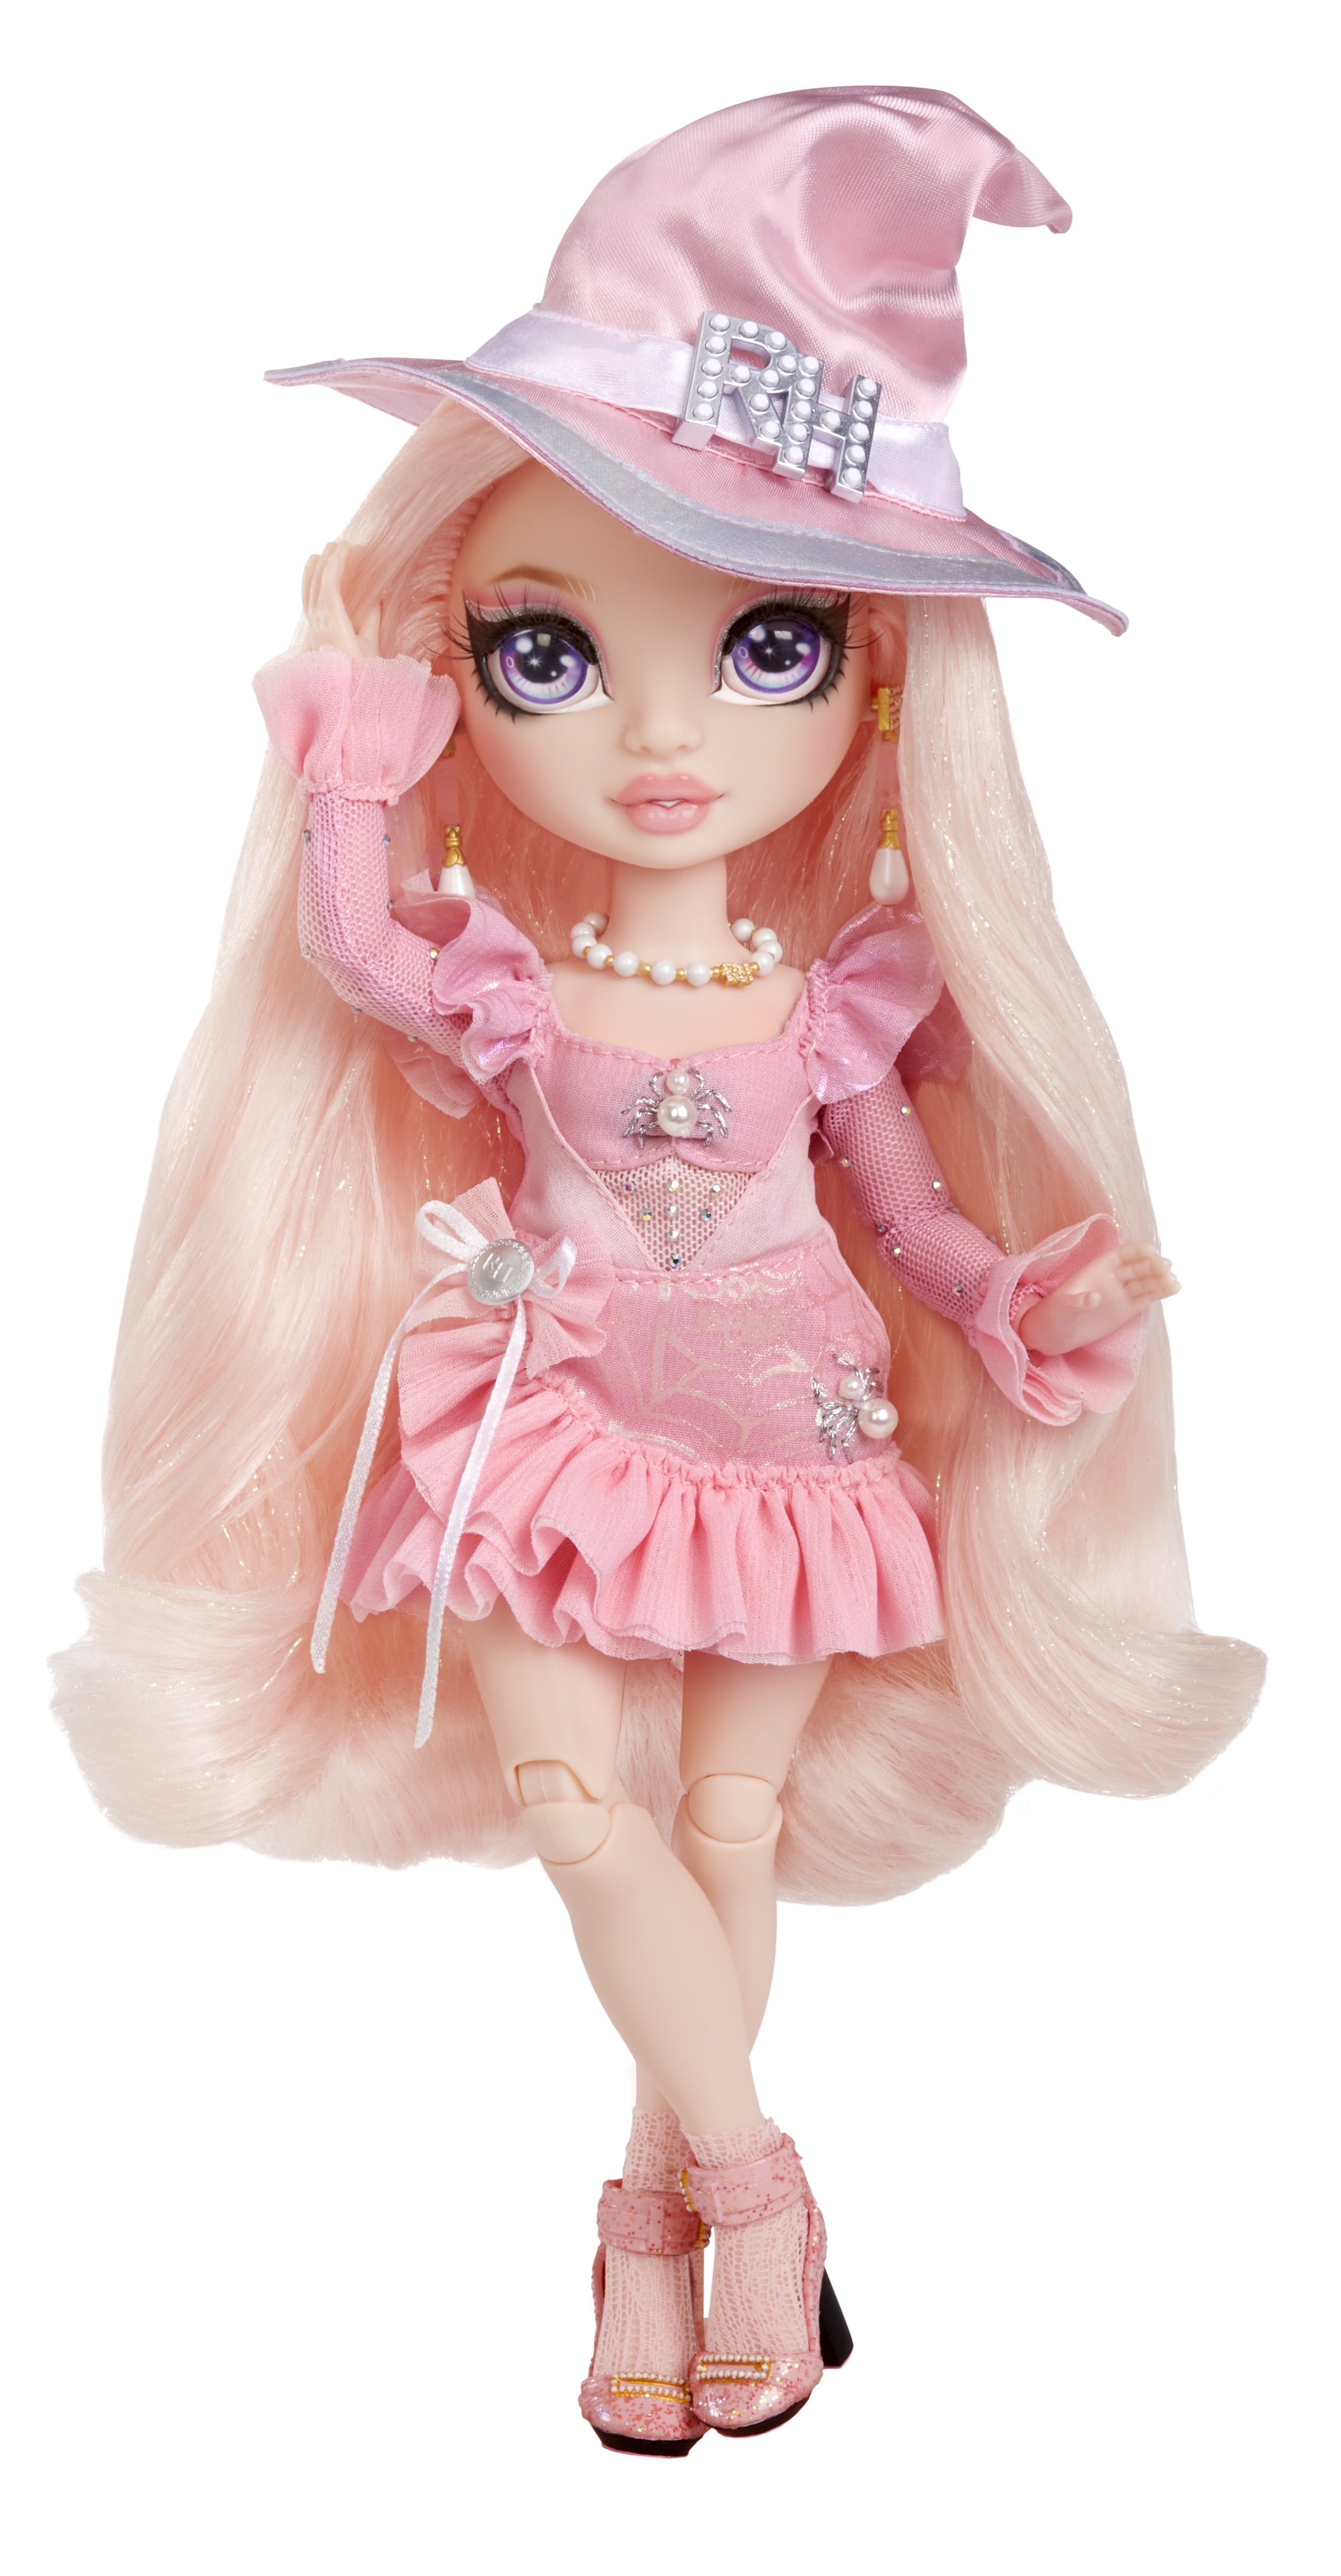 Rainbow Vision COSTUME BALL Rainbow High – Bella Parker (Pink) Fashion Doll. 11 inch Witch Costume and Accessories. Great Gift for Kids 6-12 Years Old & Collectors